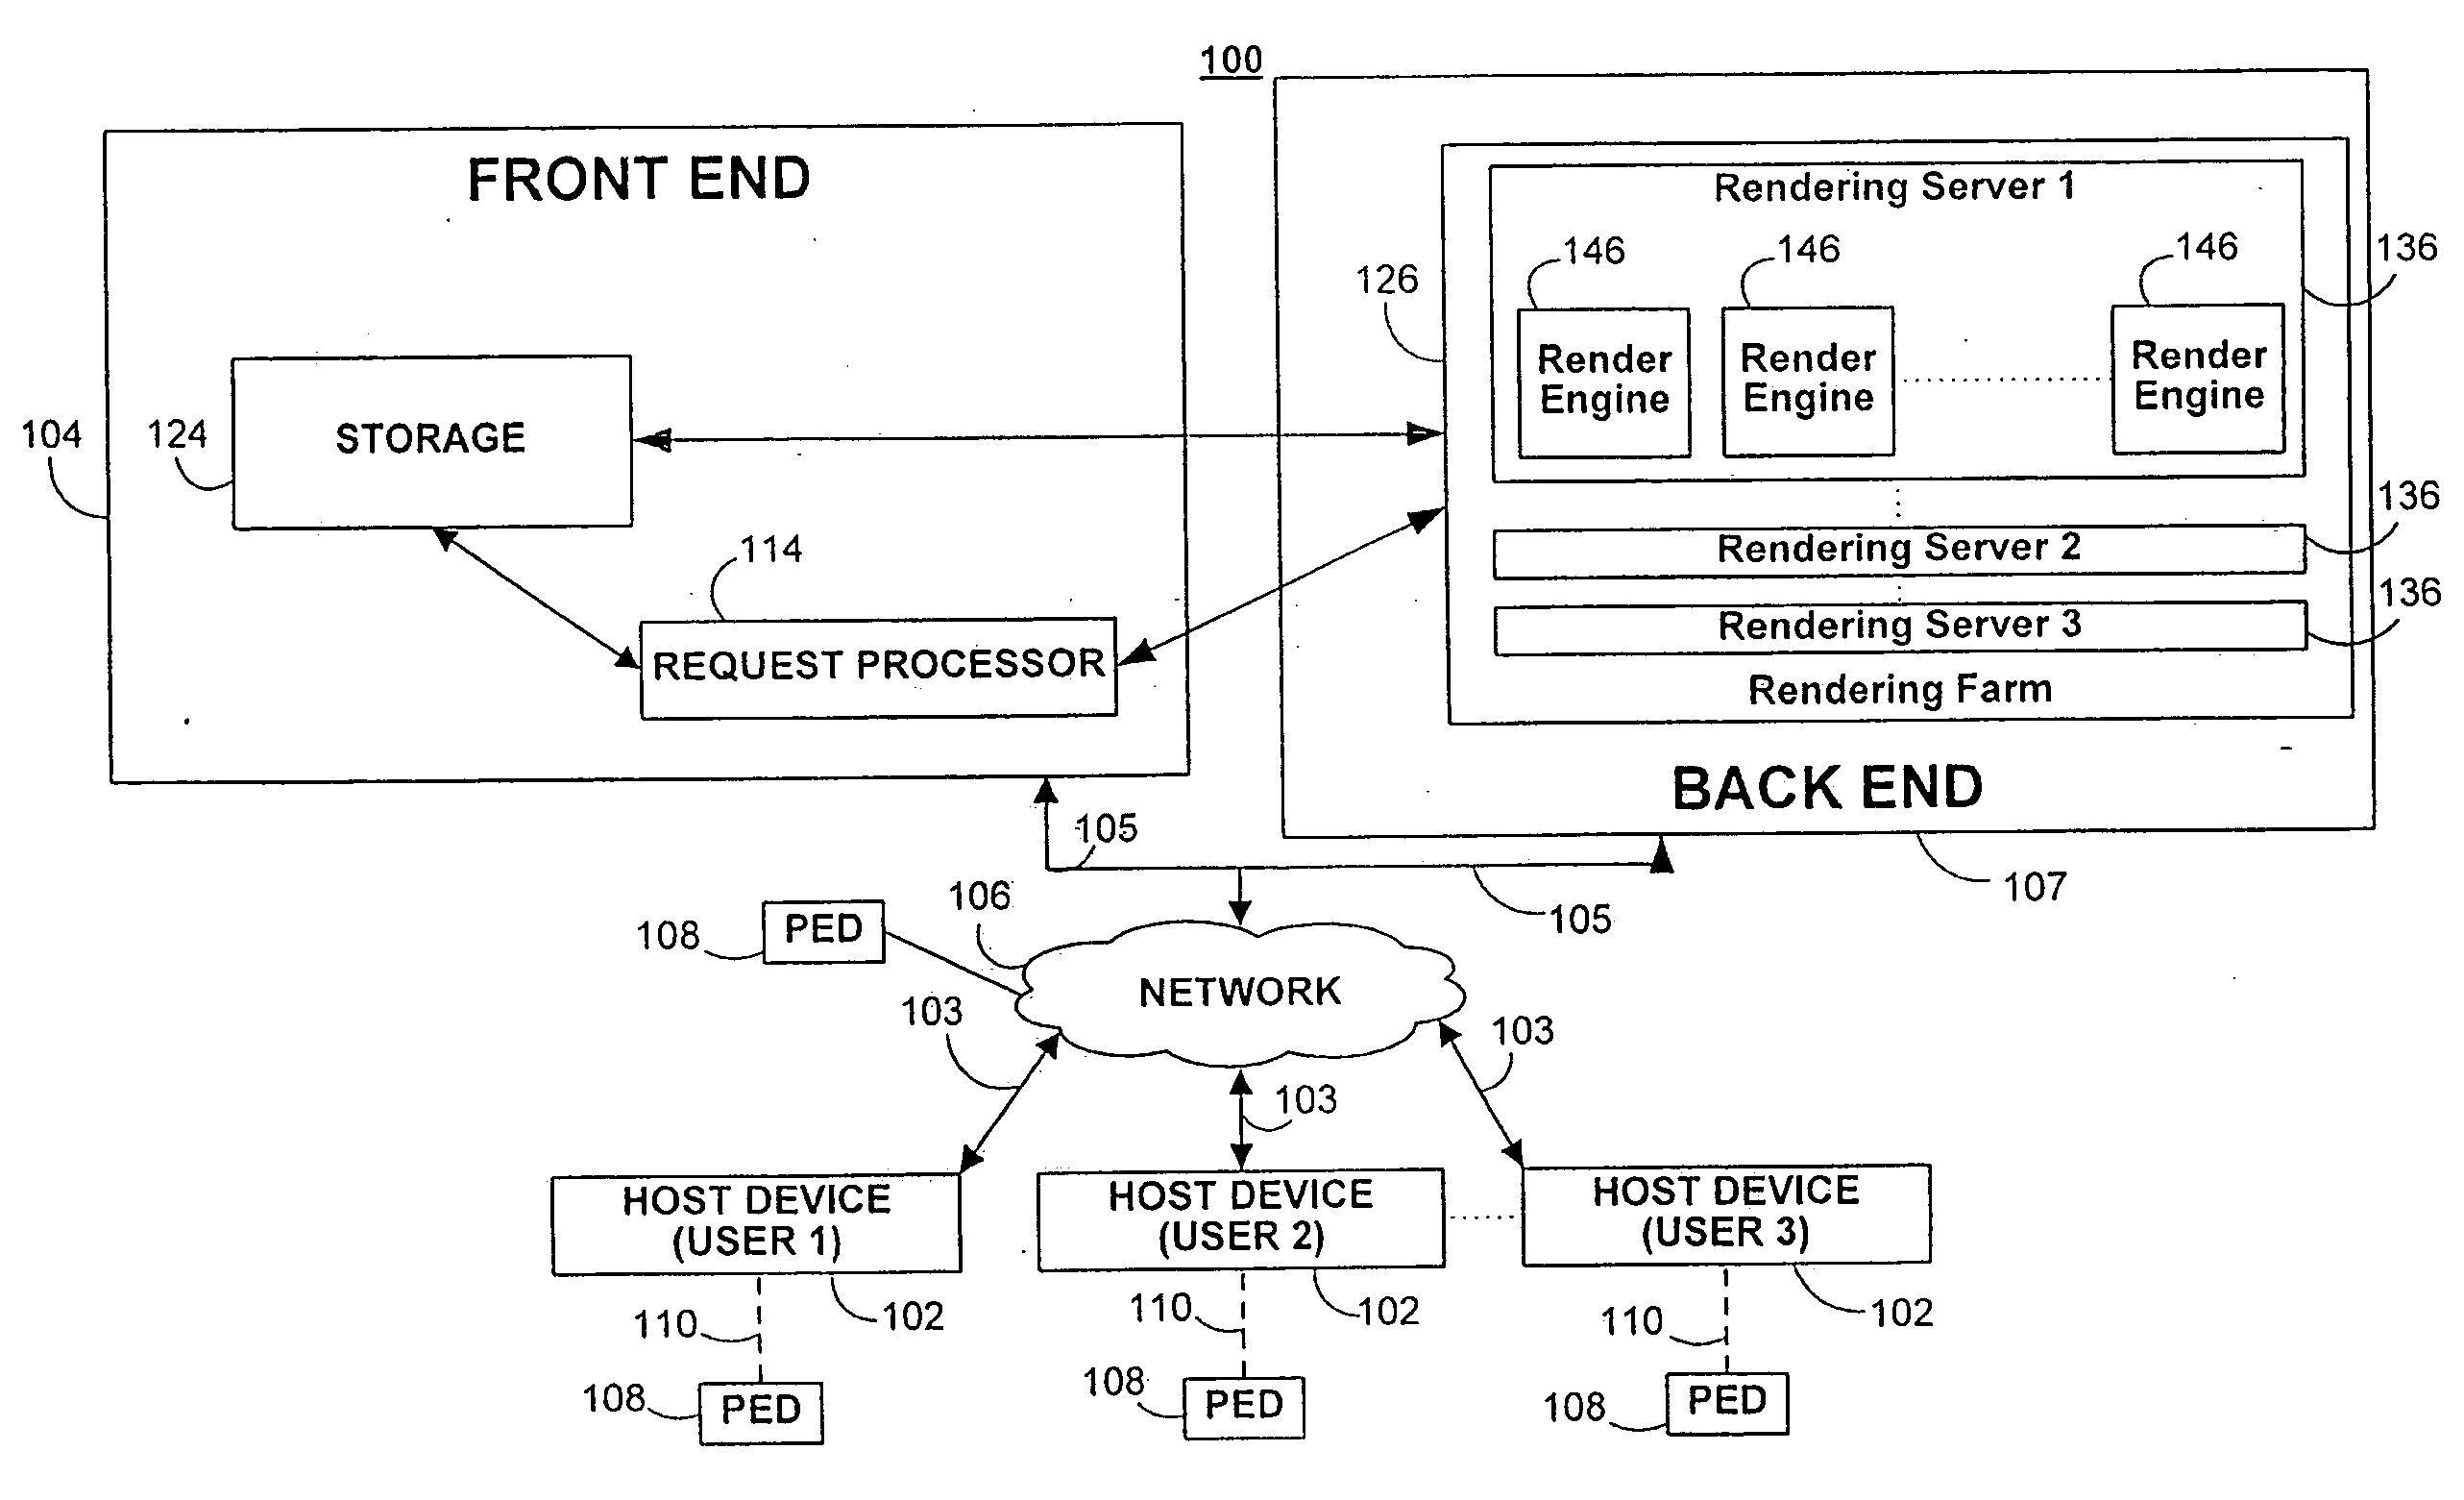 Systems and methods for concatenation of words in text to speech synthesis